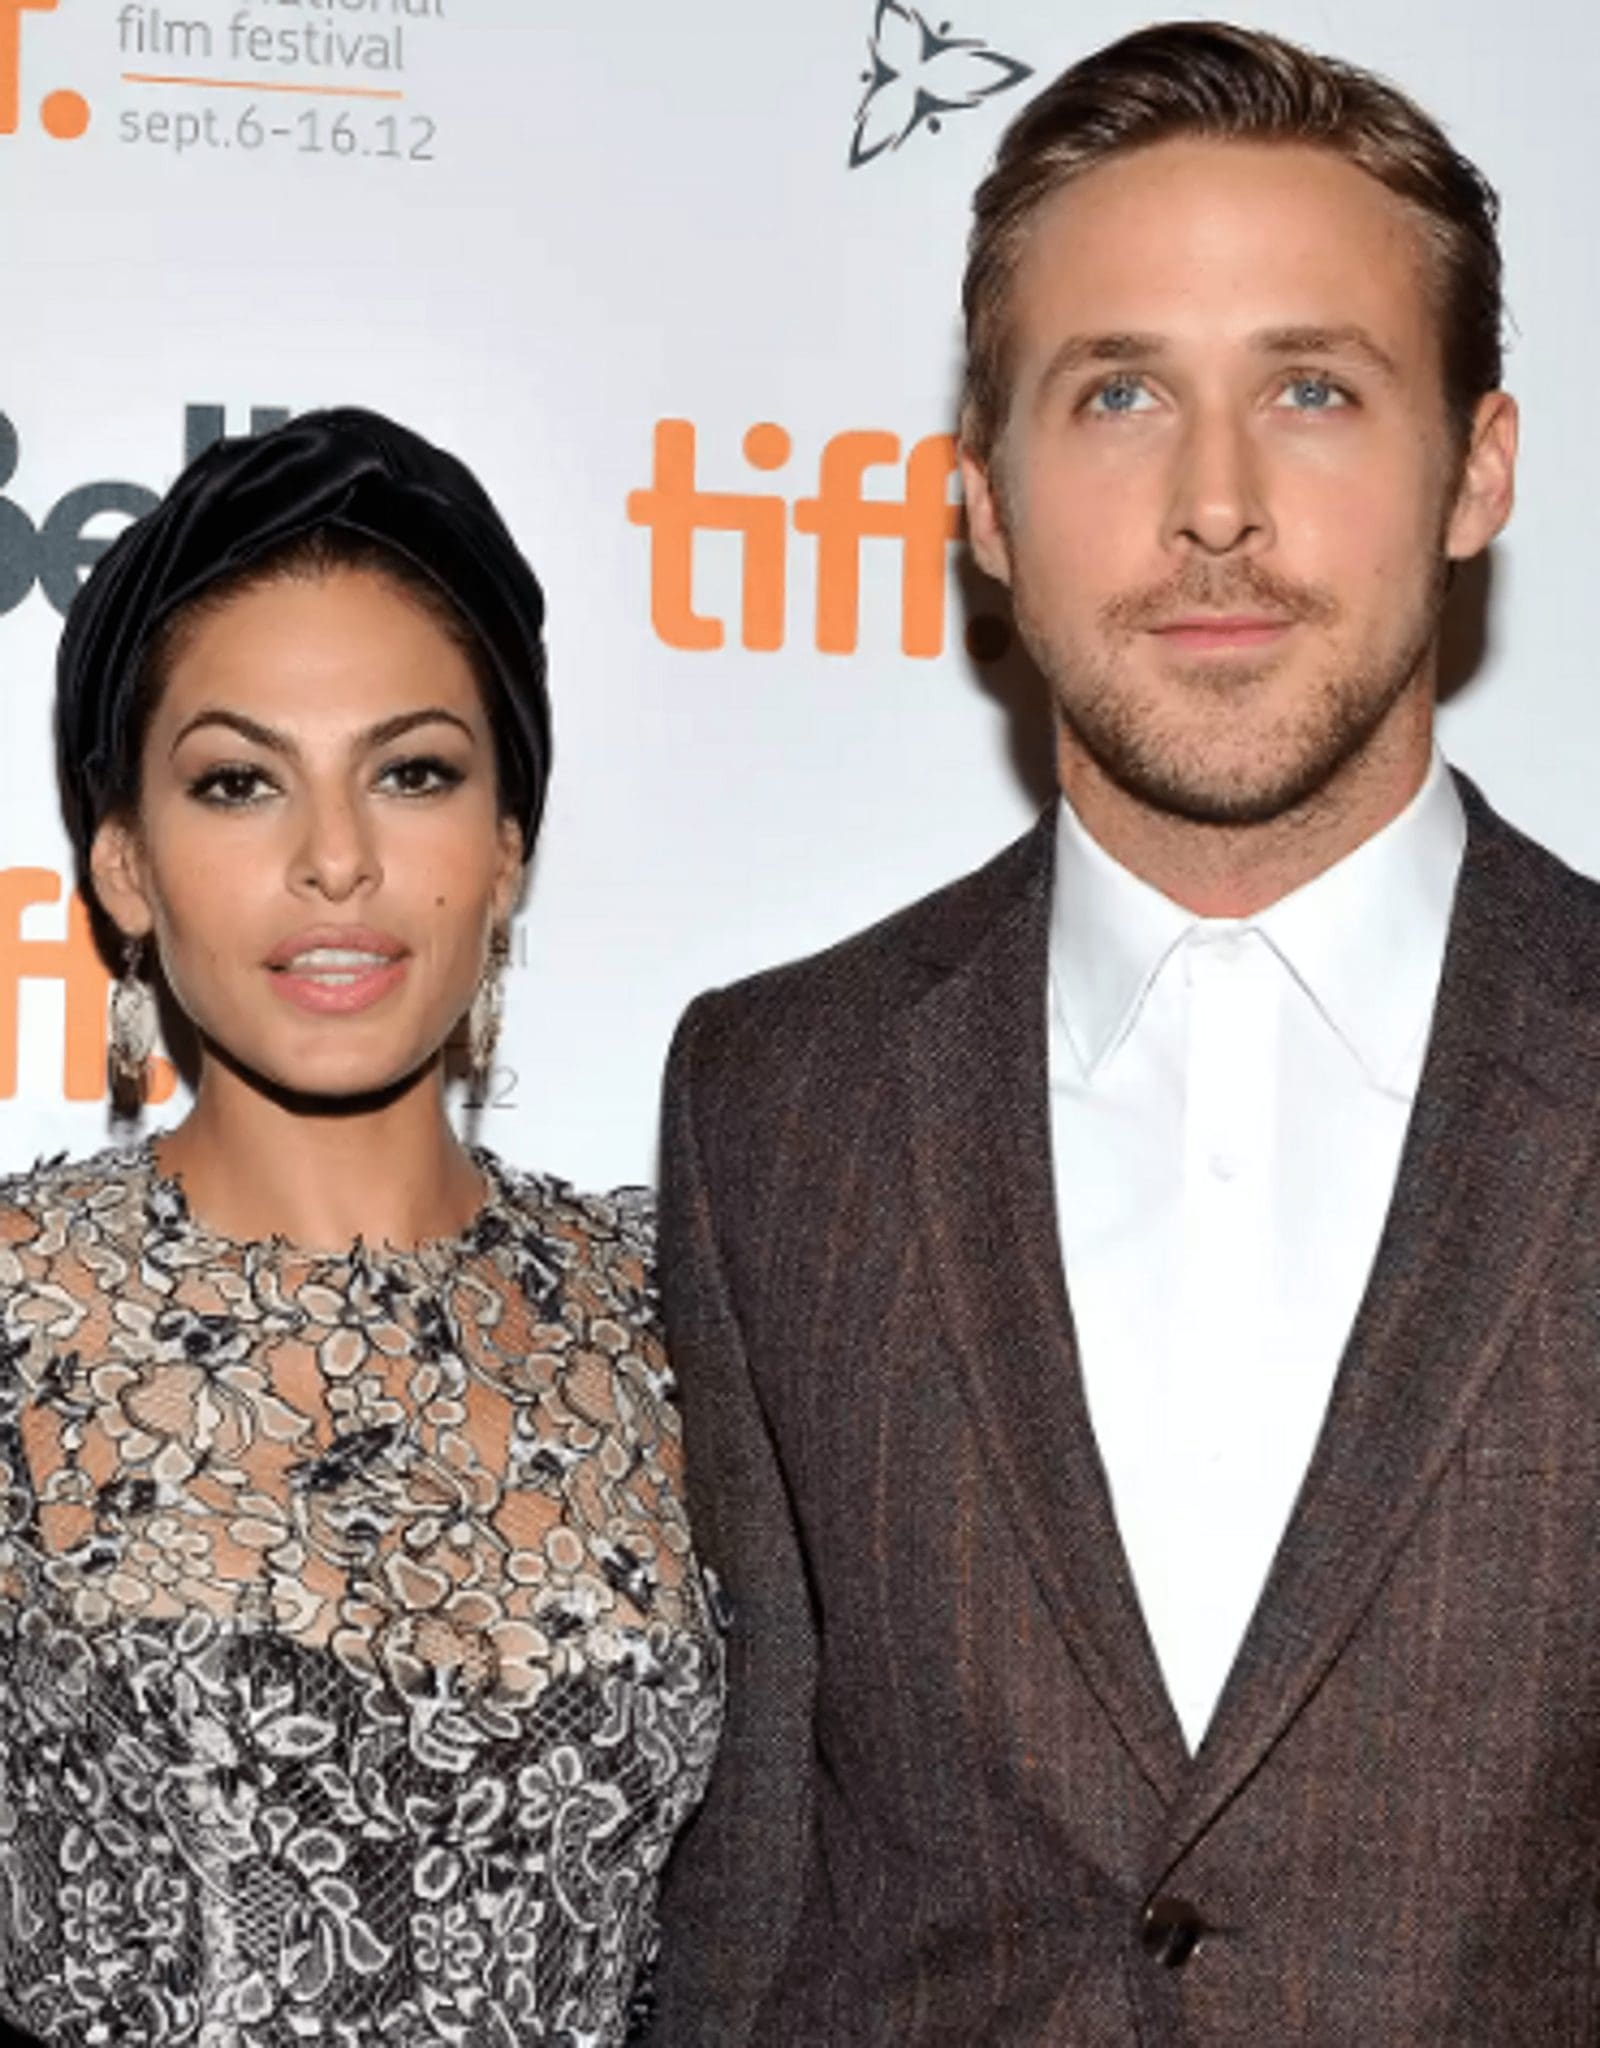 Ryan Gosling Discusses Parenting His Girls While Juggling His Profession With Eva Mendes